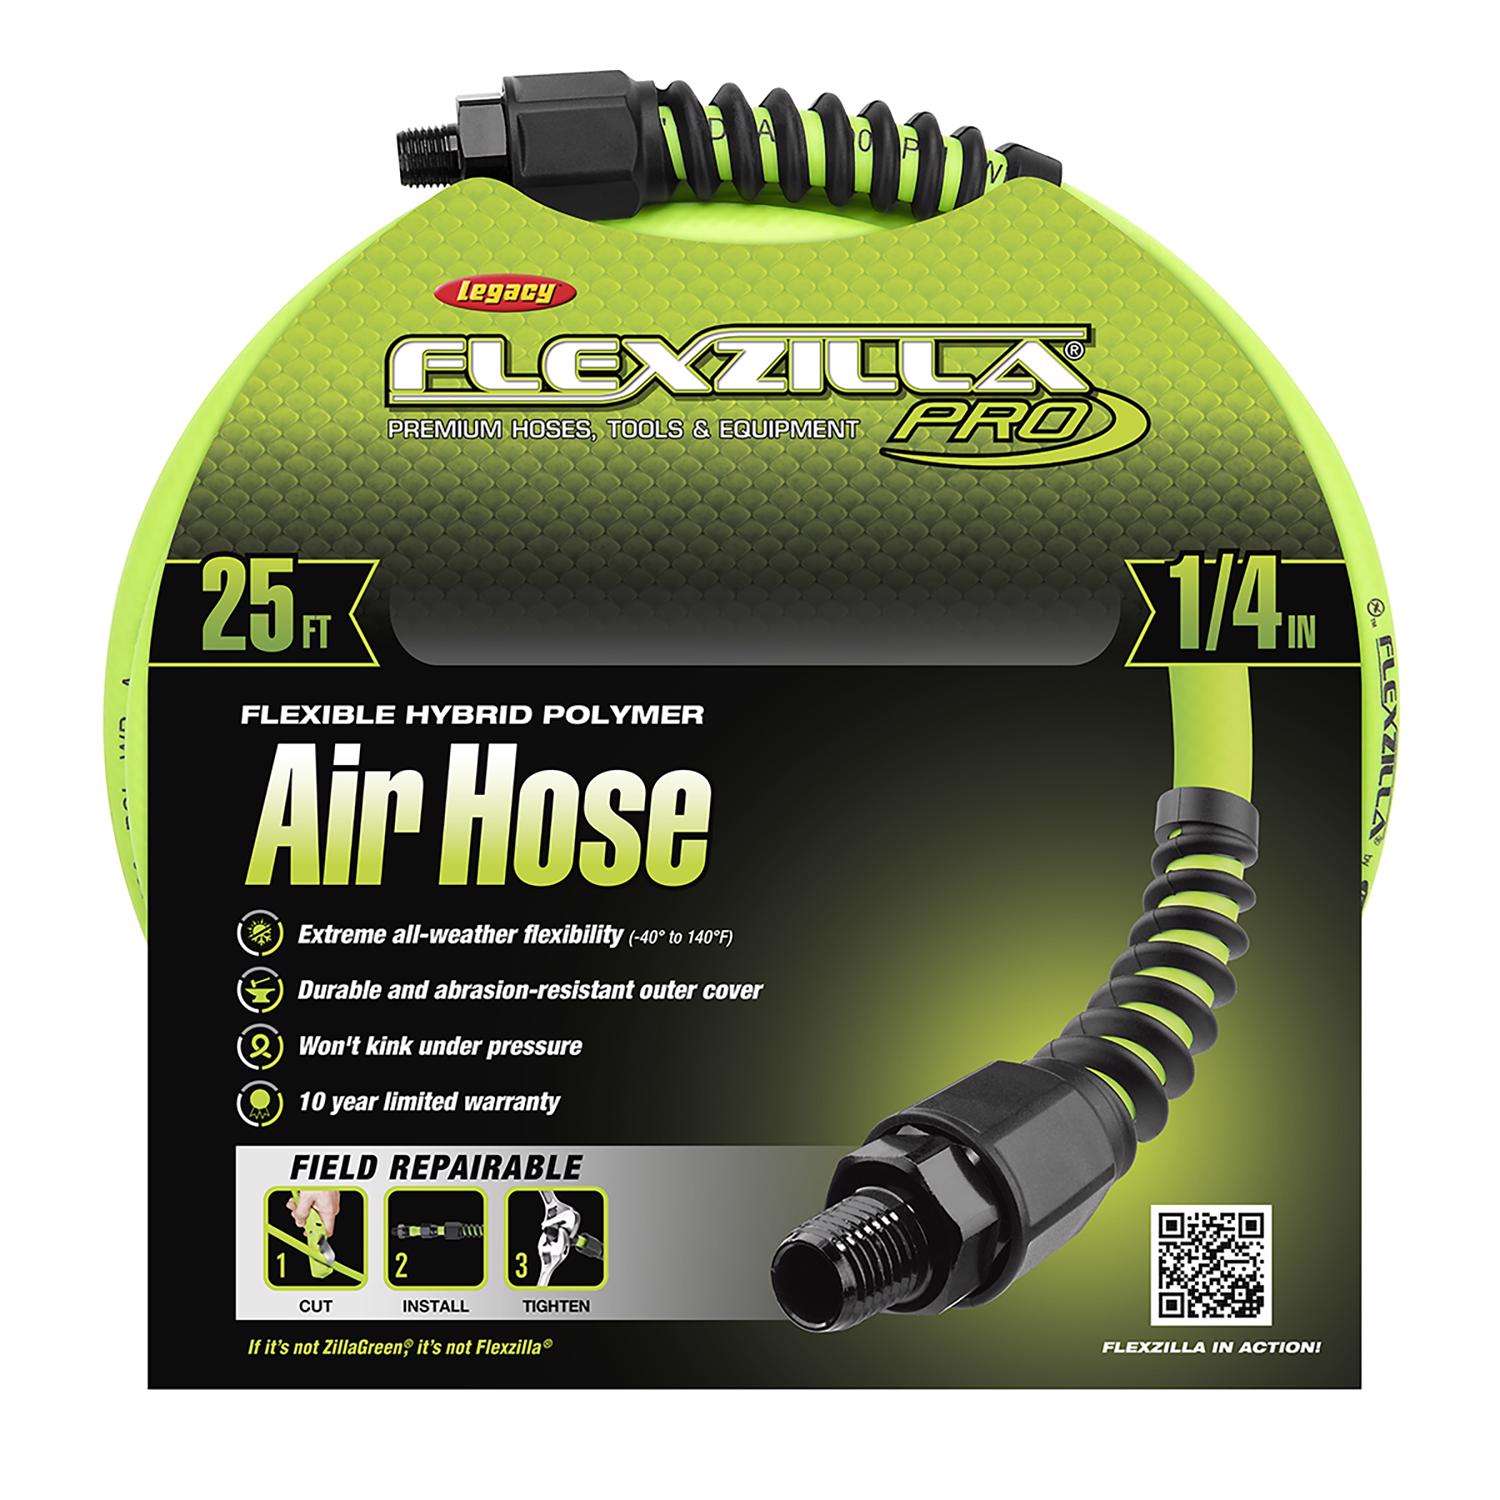 Legacy Flexzilla Pro 25 ft. L X 1/4 in. D Hybrid Polymer Air Hose 300 psi  Zilla Green - Ace Hardware